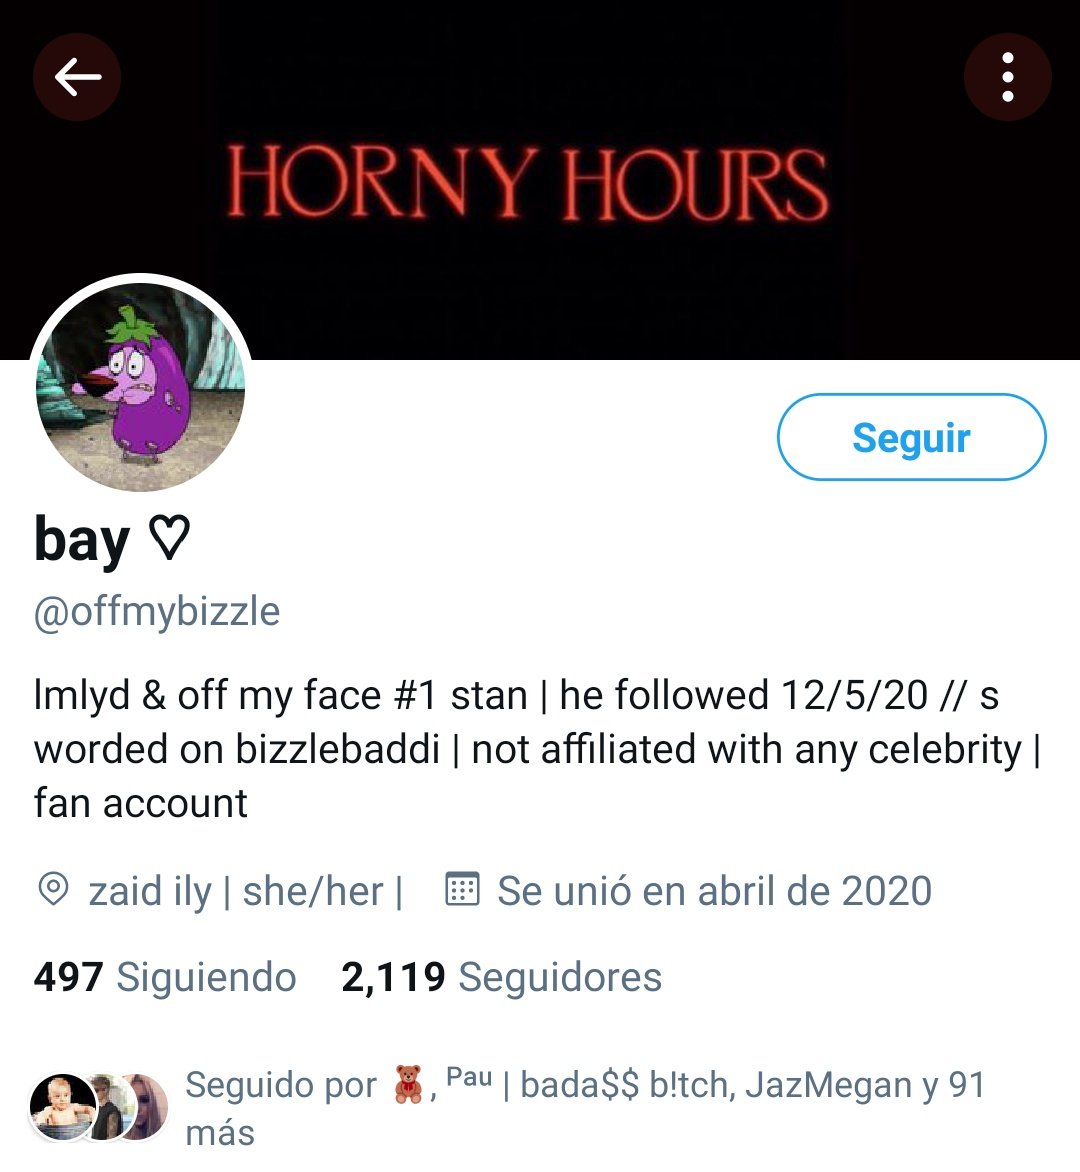 @/offmybizzle